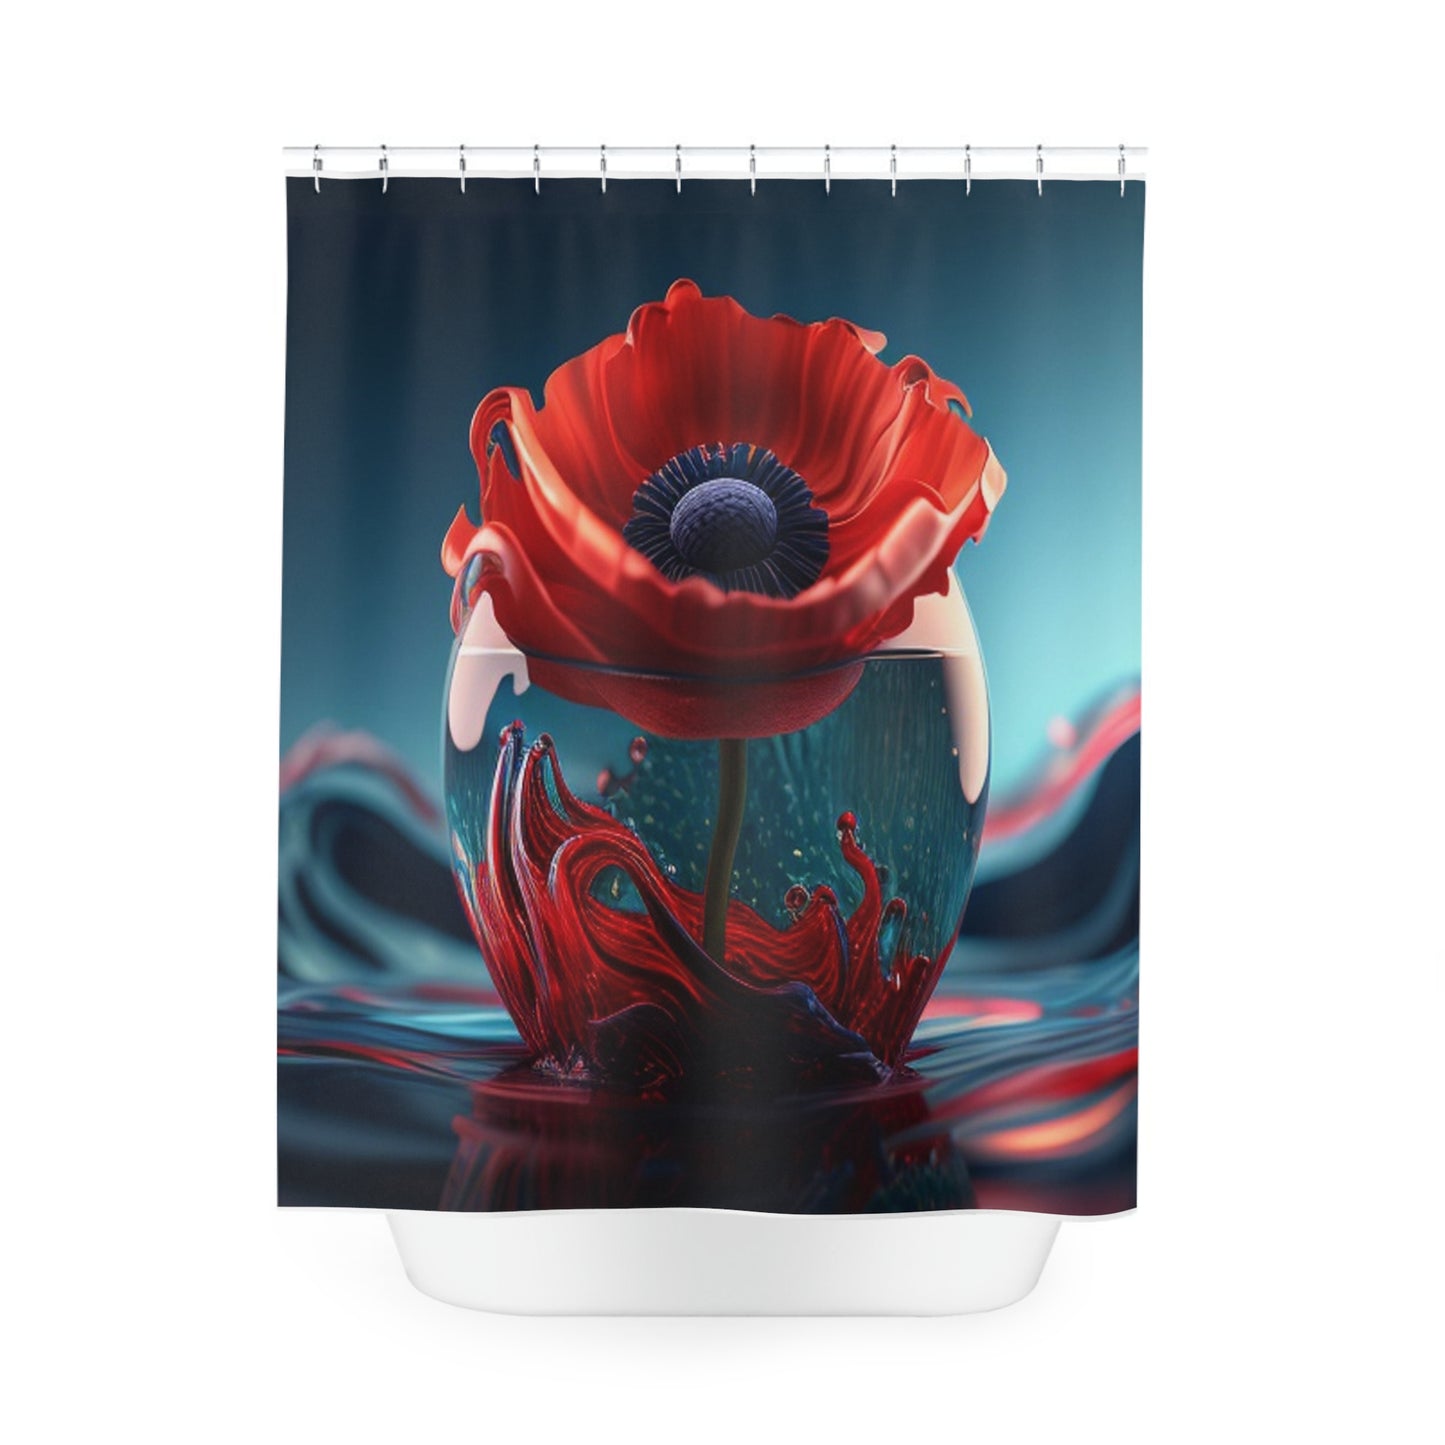 Polyester Shower Curtain Red Anemone in a Vase 2